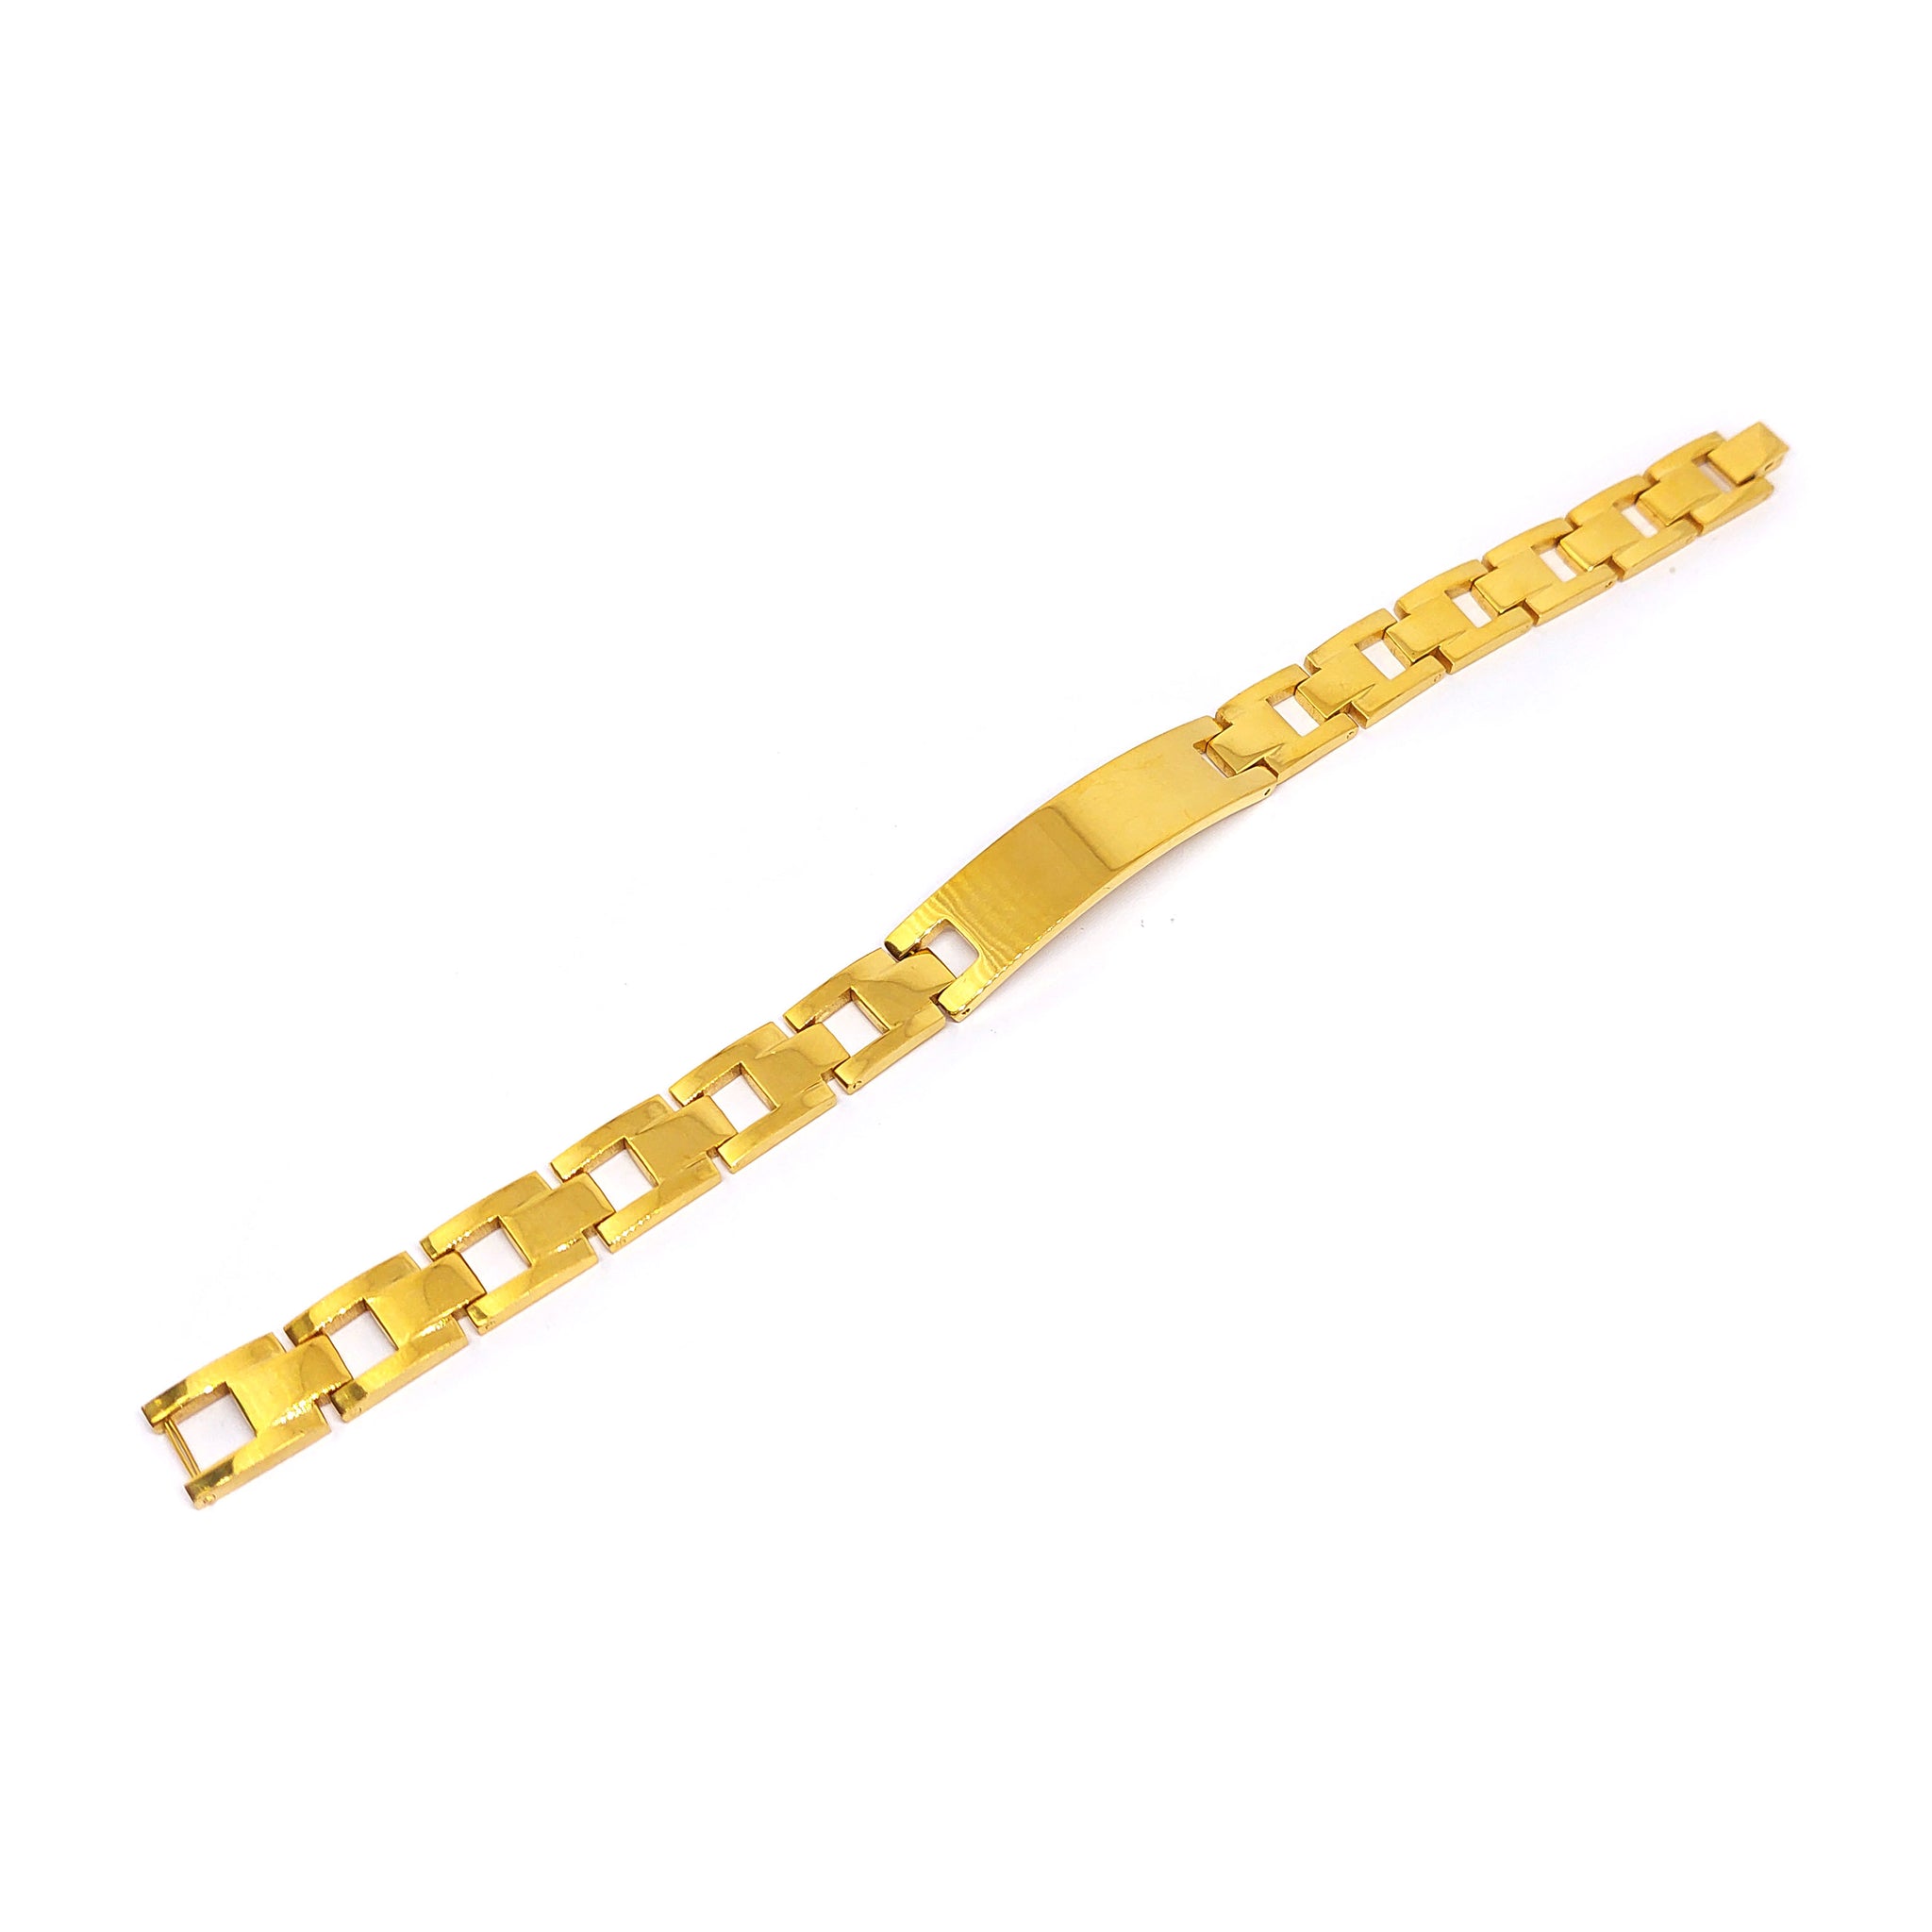 ESBL 7979: All Gold Thick Large ID Nameplate H-Link Chain Blet